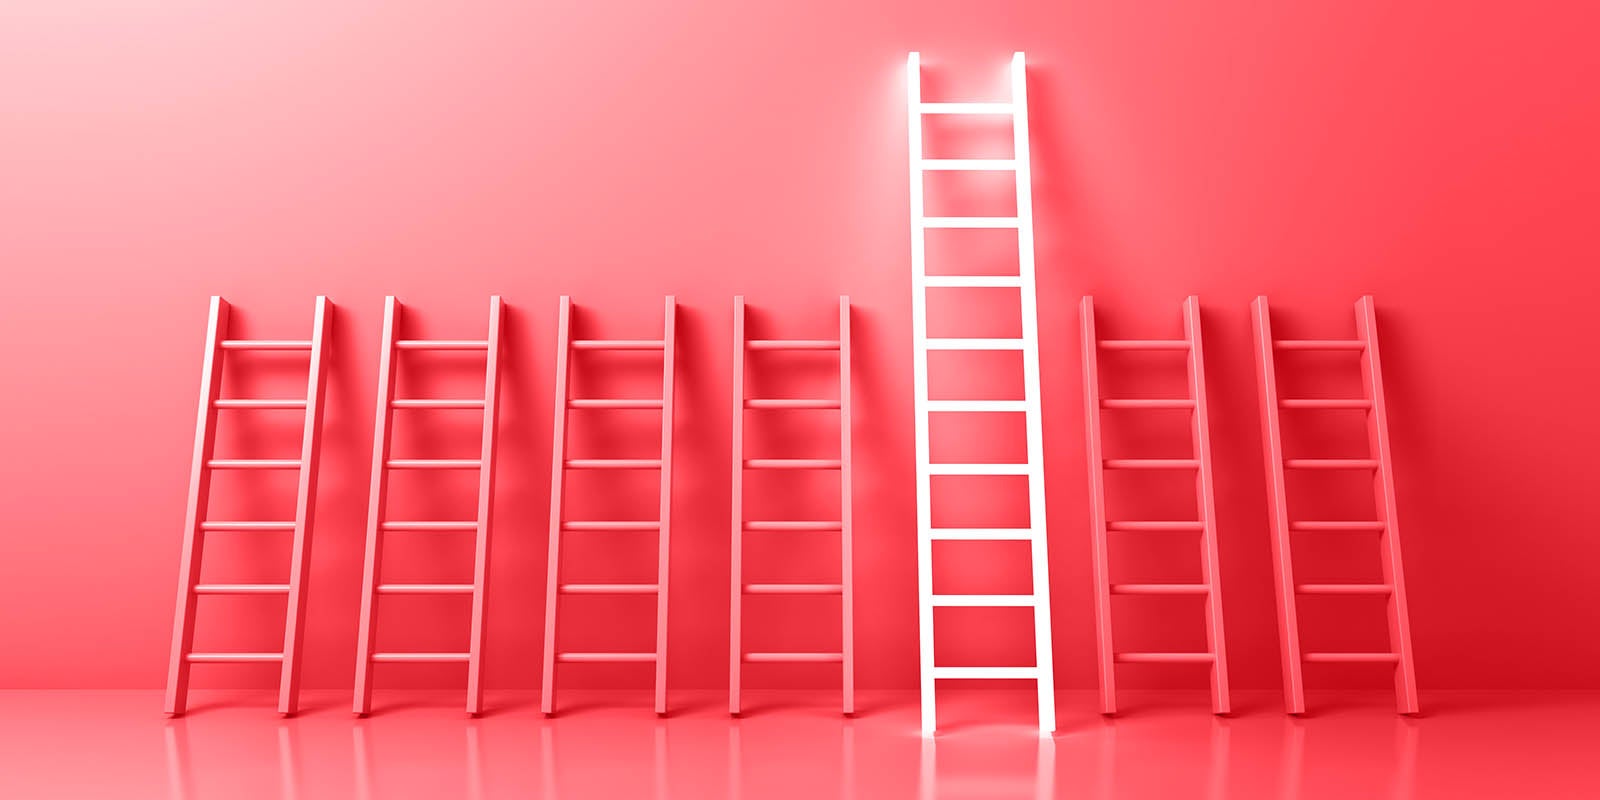 ladders, with one ladder taller than the others, symbolizing what is the difference between learning and development